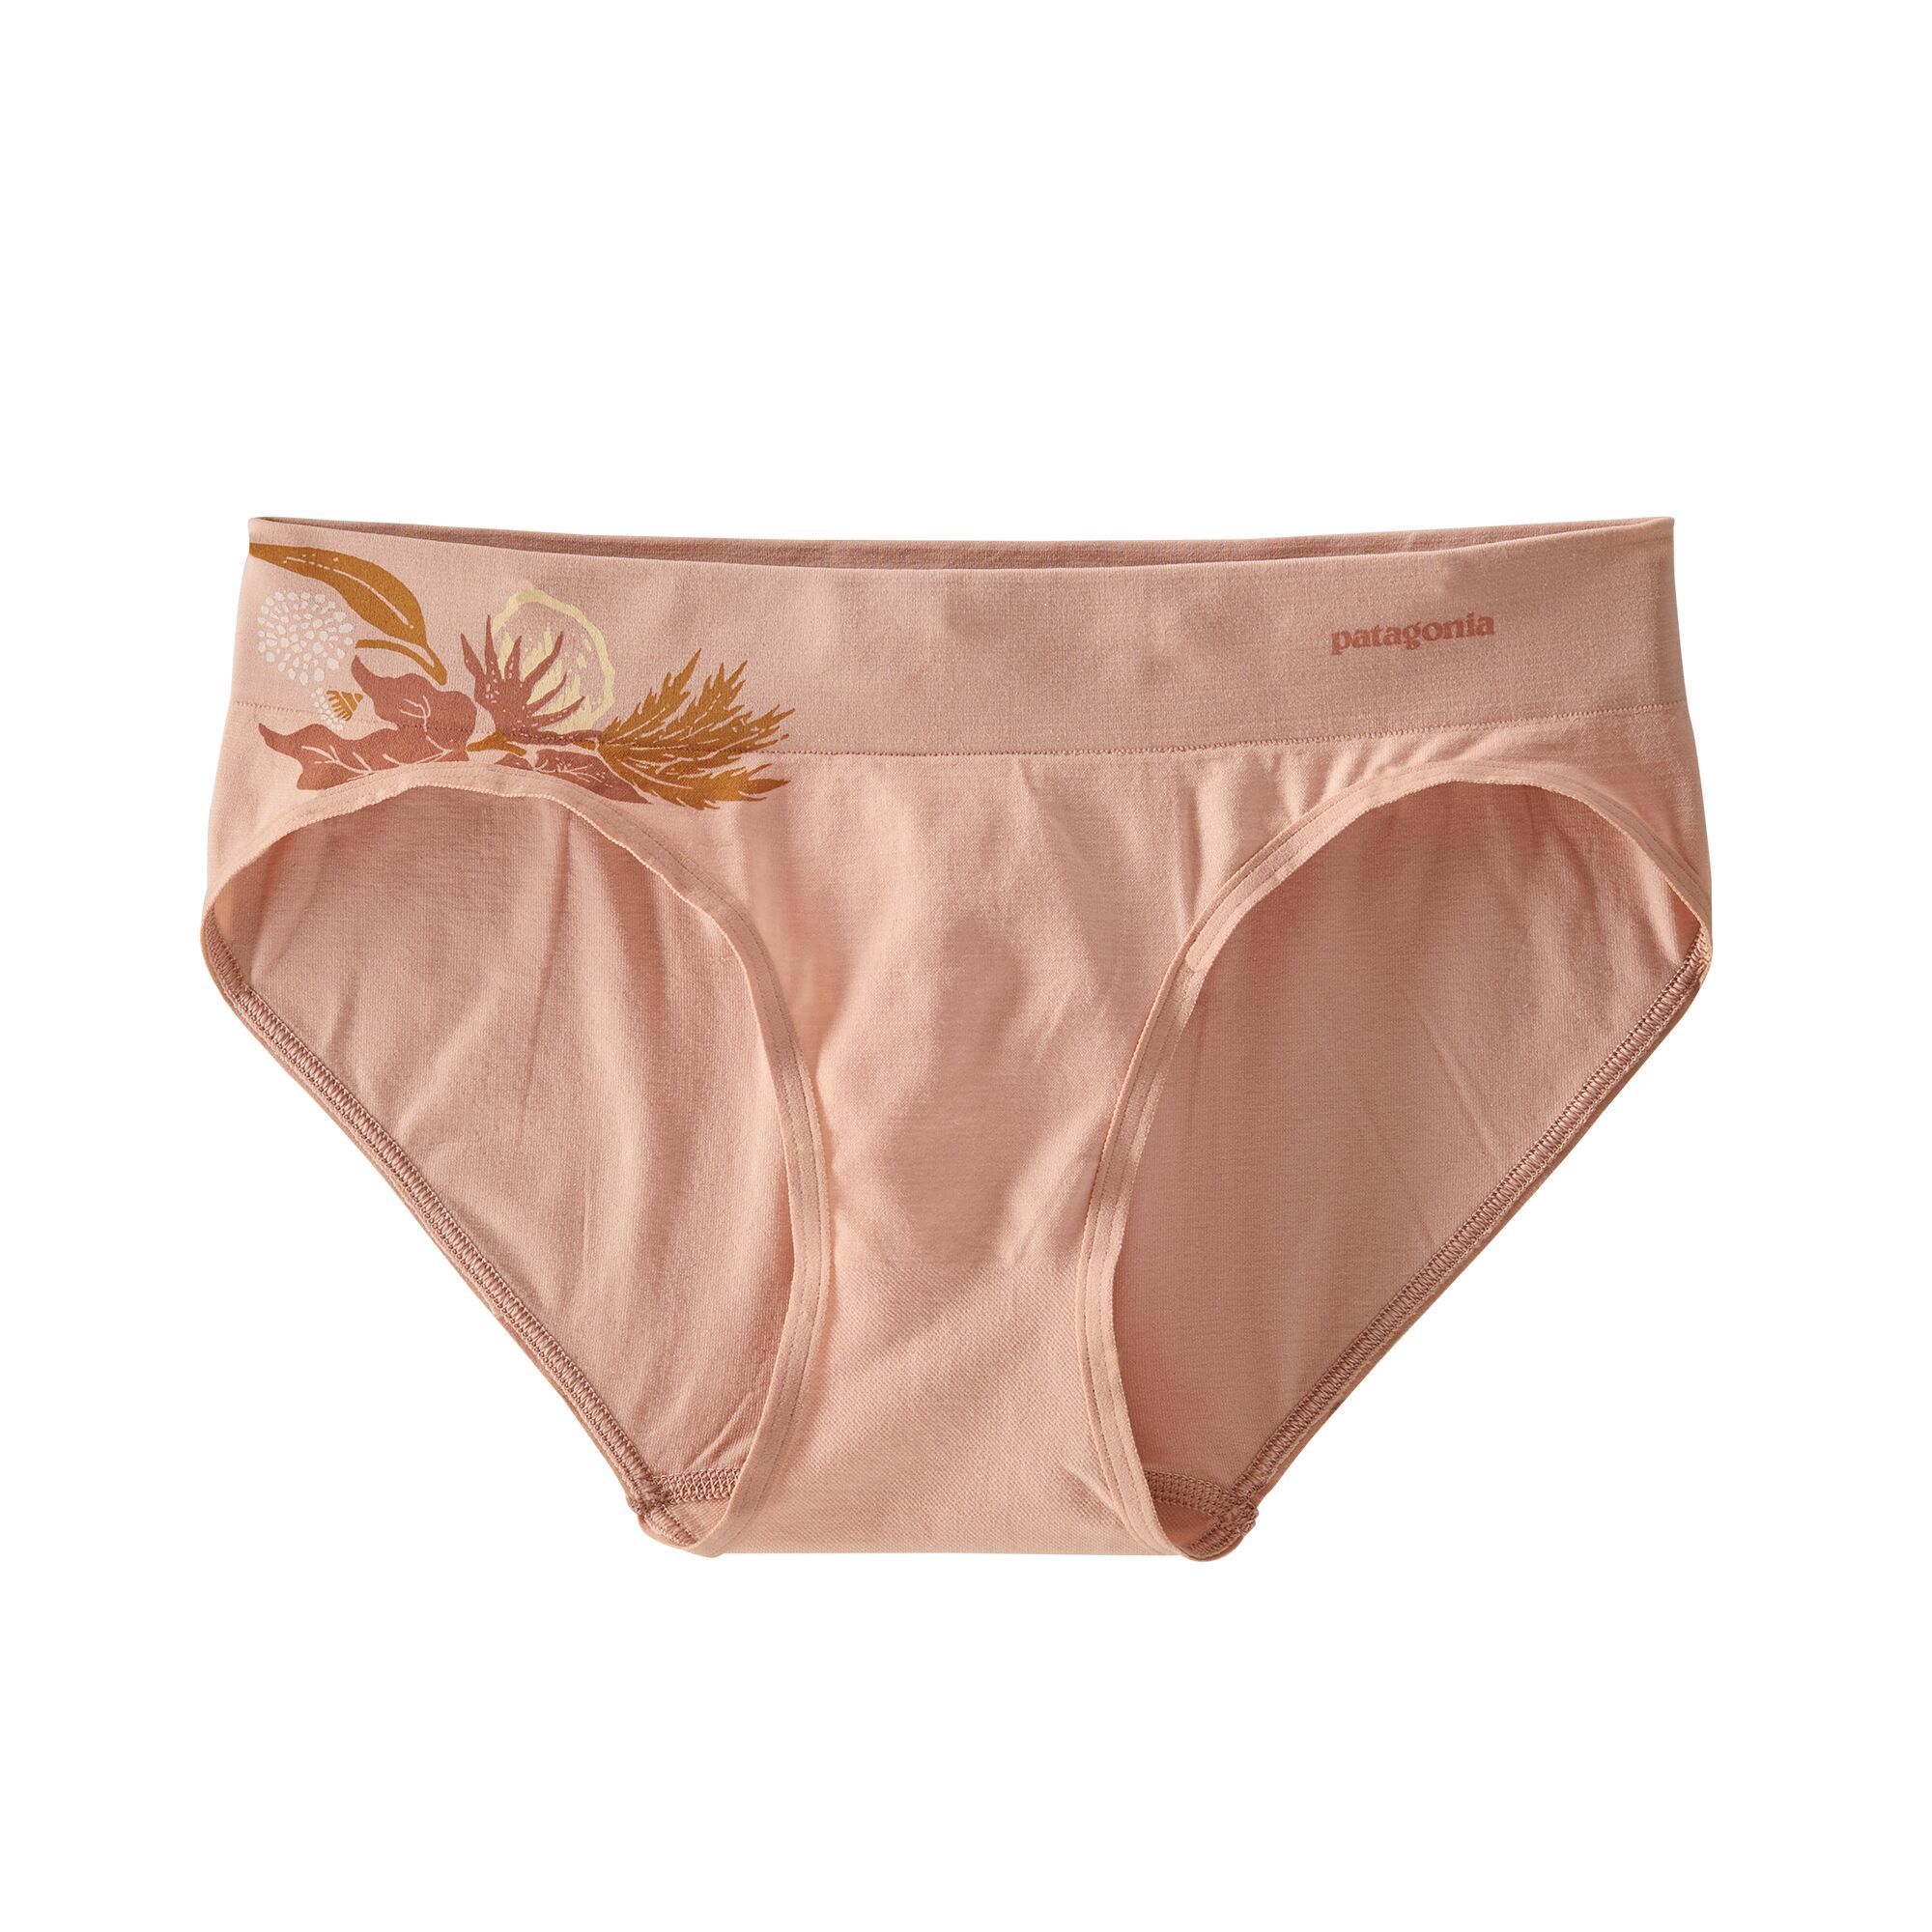 Patagonia Women's Active Briefs - Recycled Polyester, Cotton Flora Graphic: Scotch Pink / XS